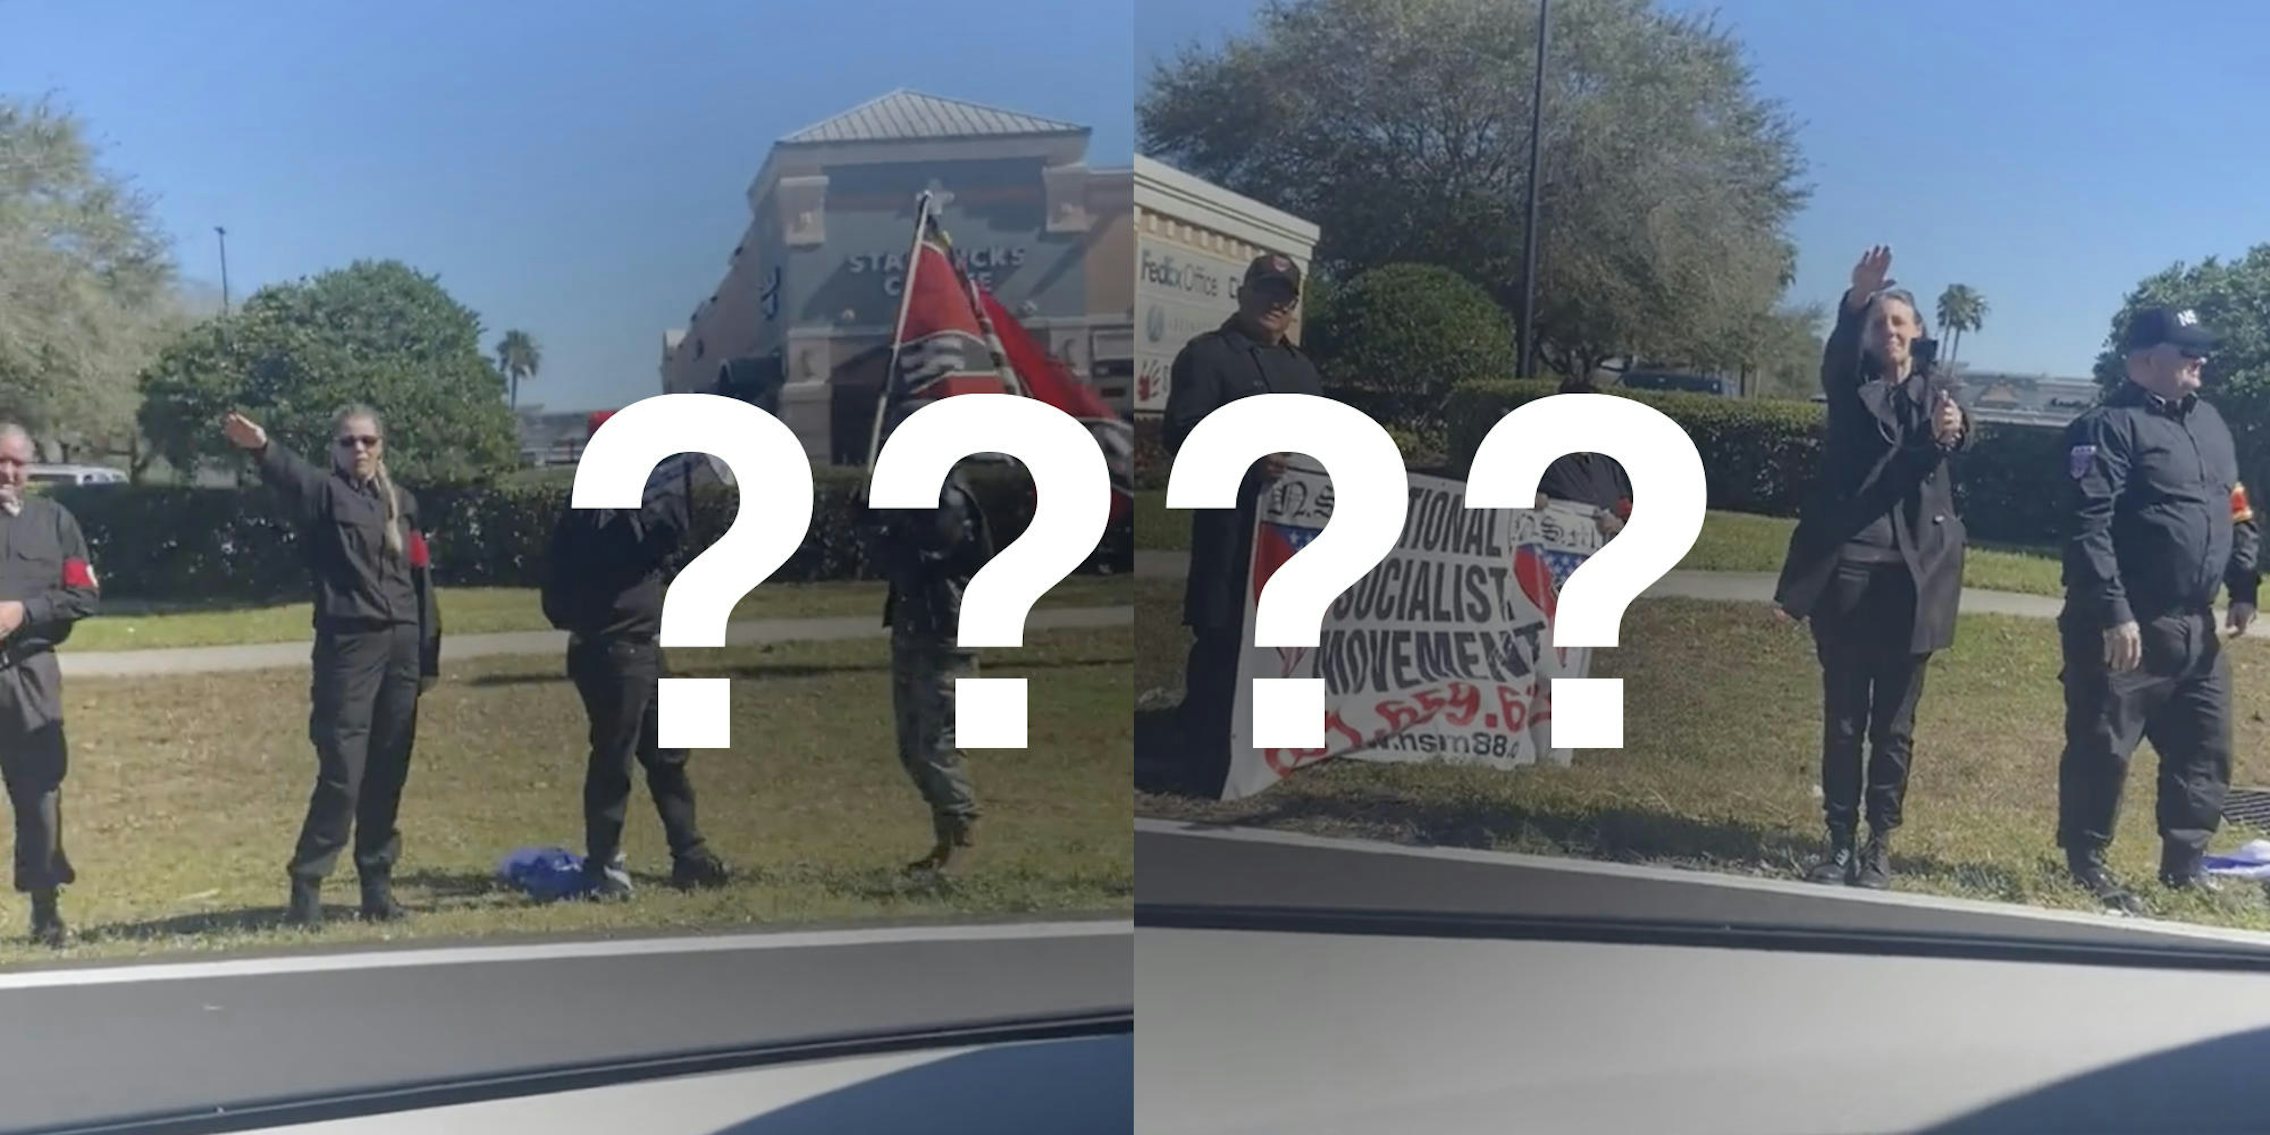 a nazi rally with question marks overlaid on top